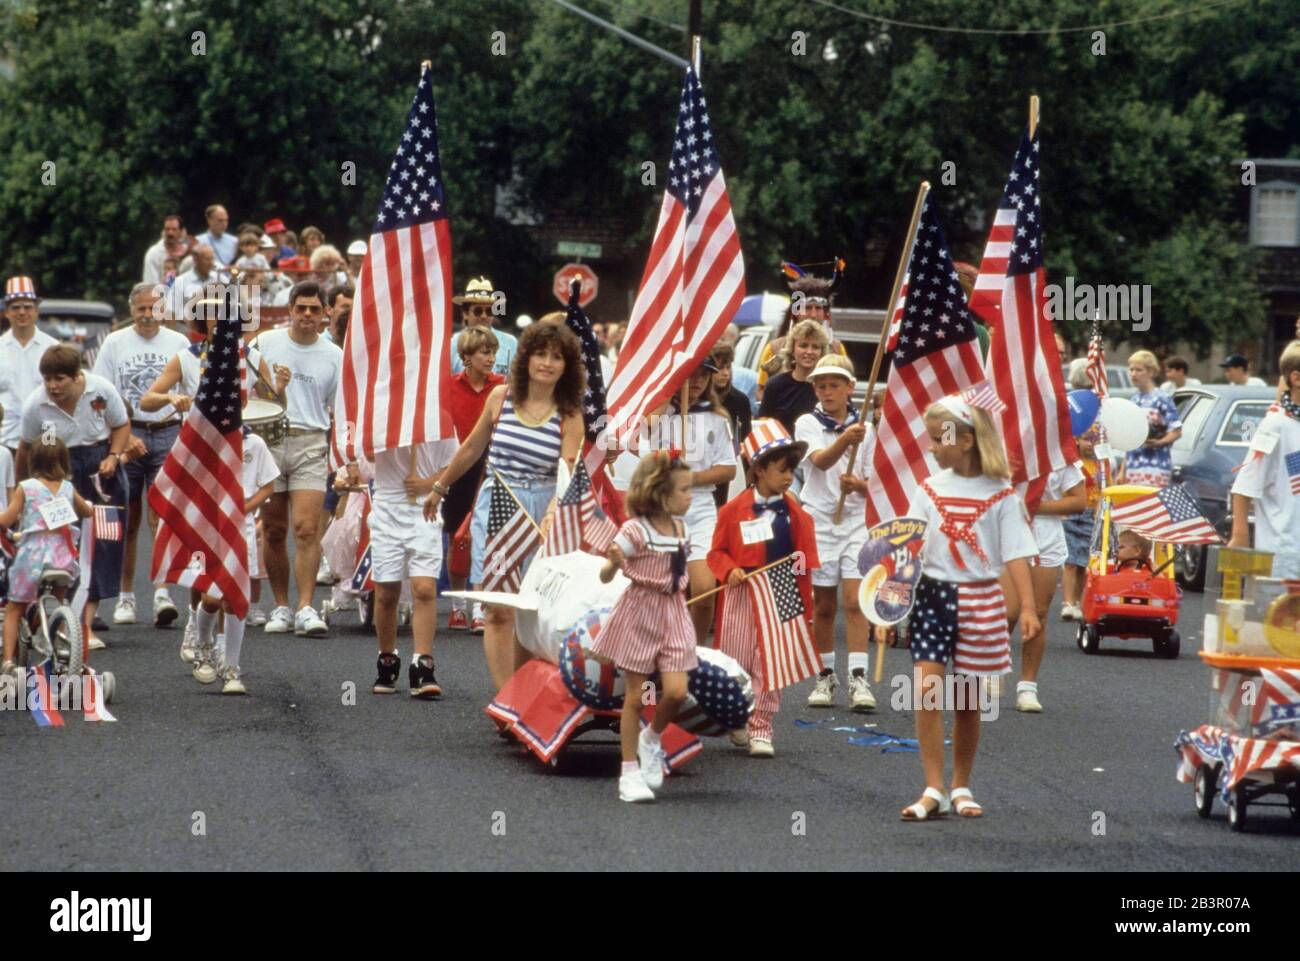 Austin, Texas USA, July 4 1989: Parents and children walk in a small neighborhood parade celebrating American Independence Day on the Fourth of July. ©Bob Daemmrich Stock Photo